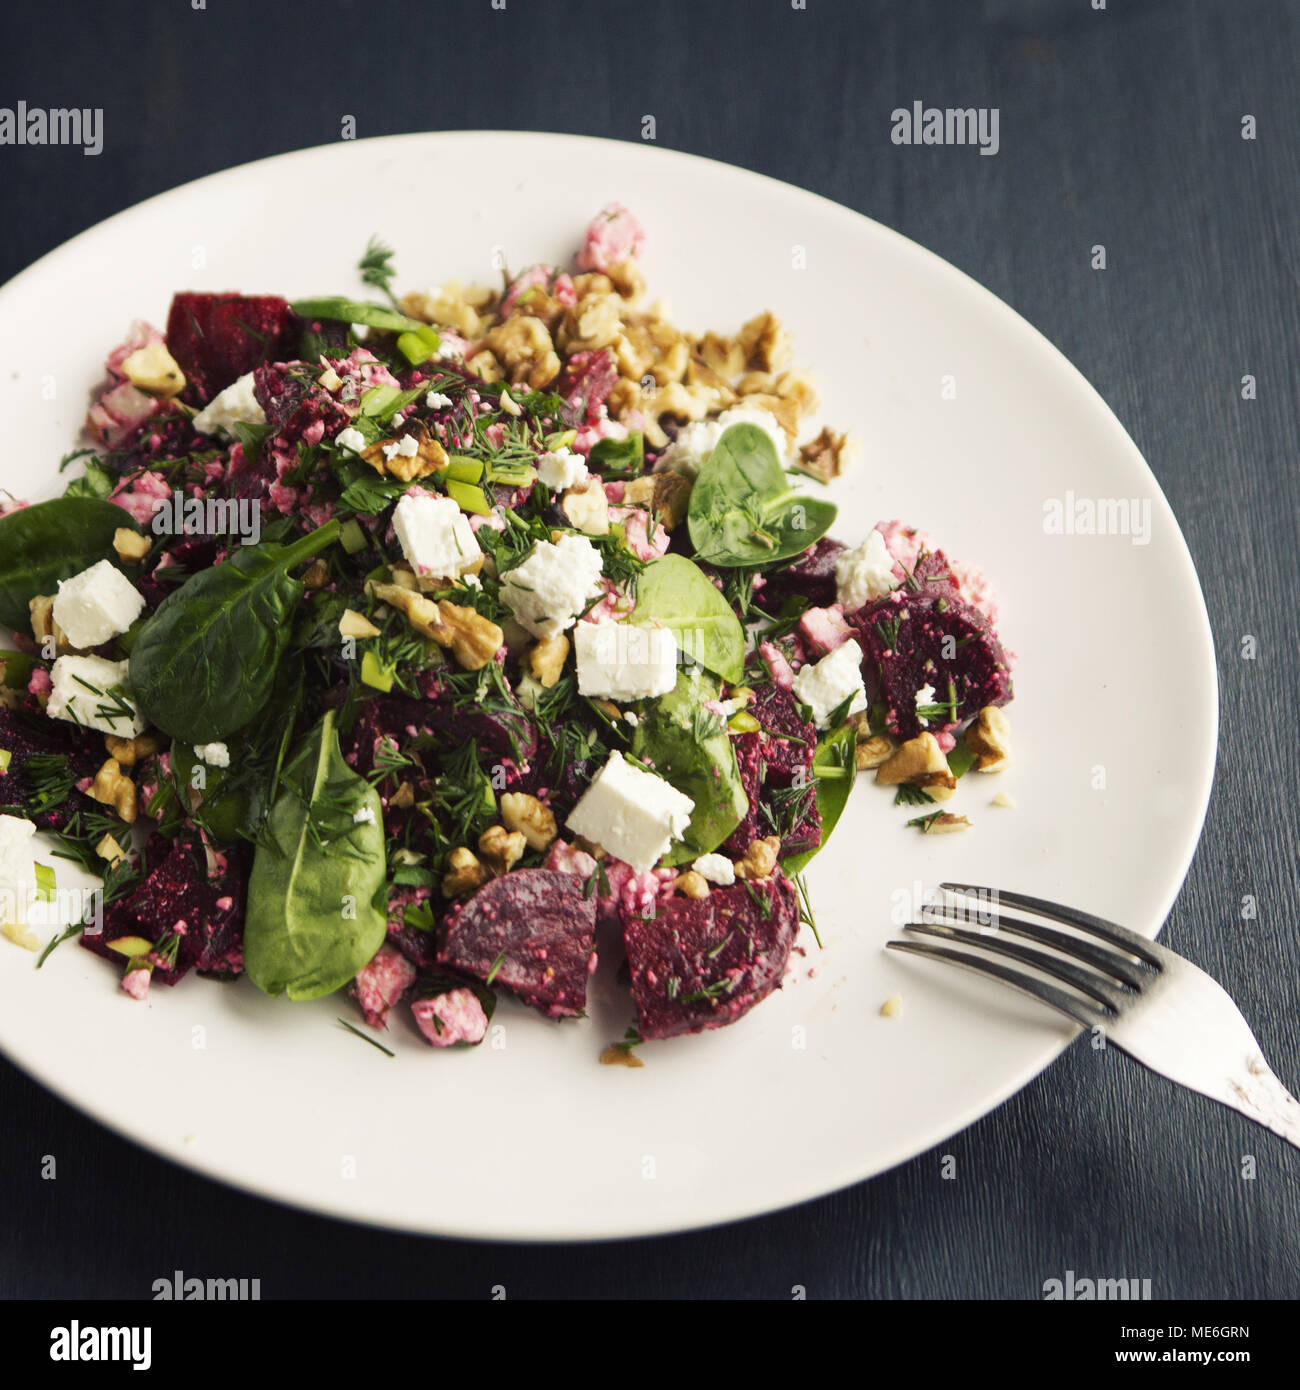 Beetroot Salad With Cottage Cheese Baby Spinach And Walnuts